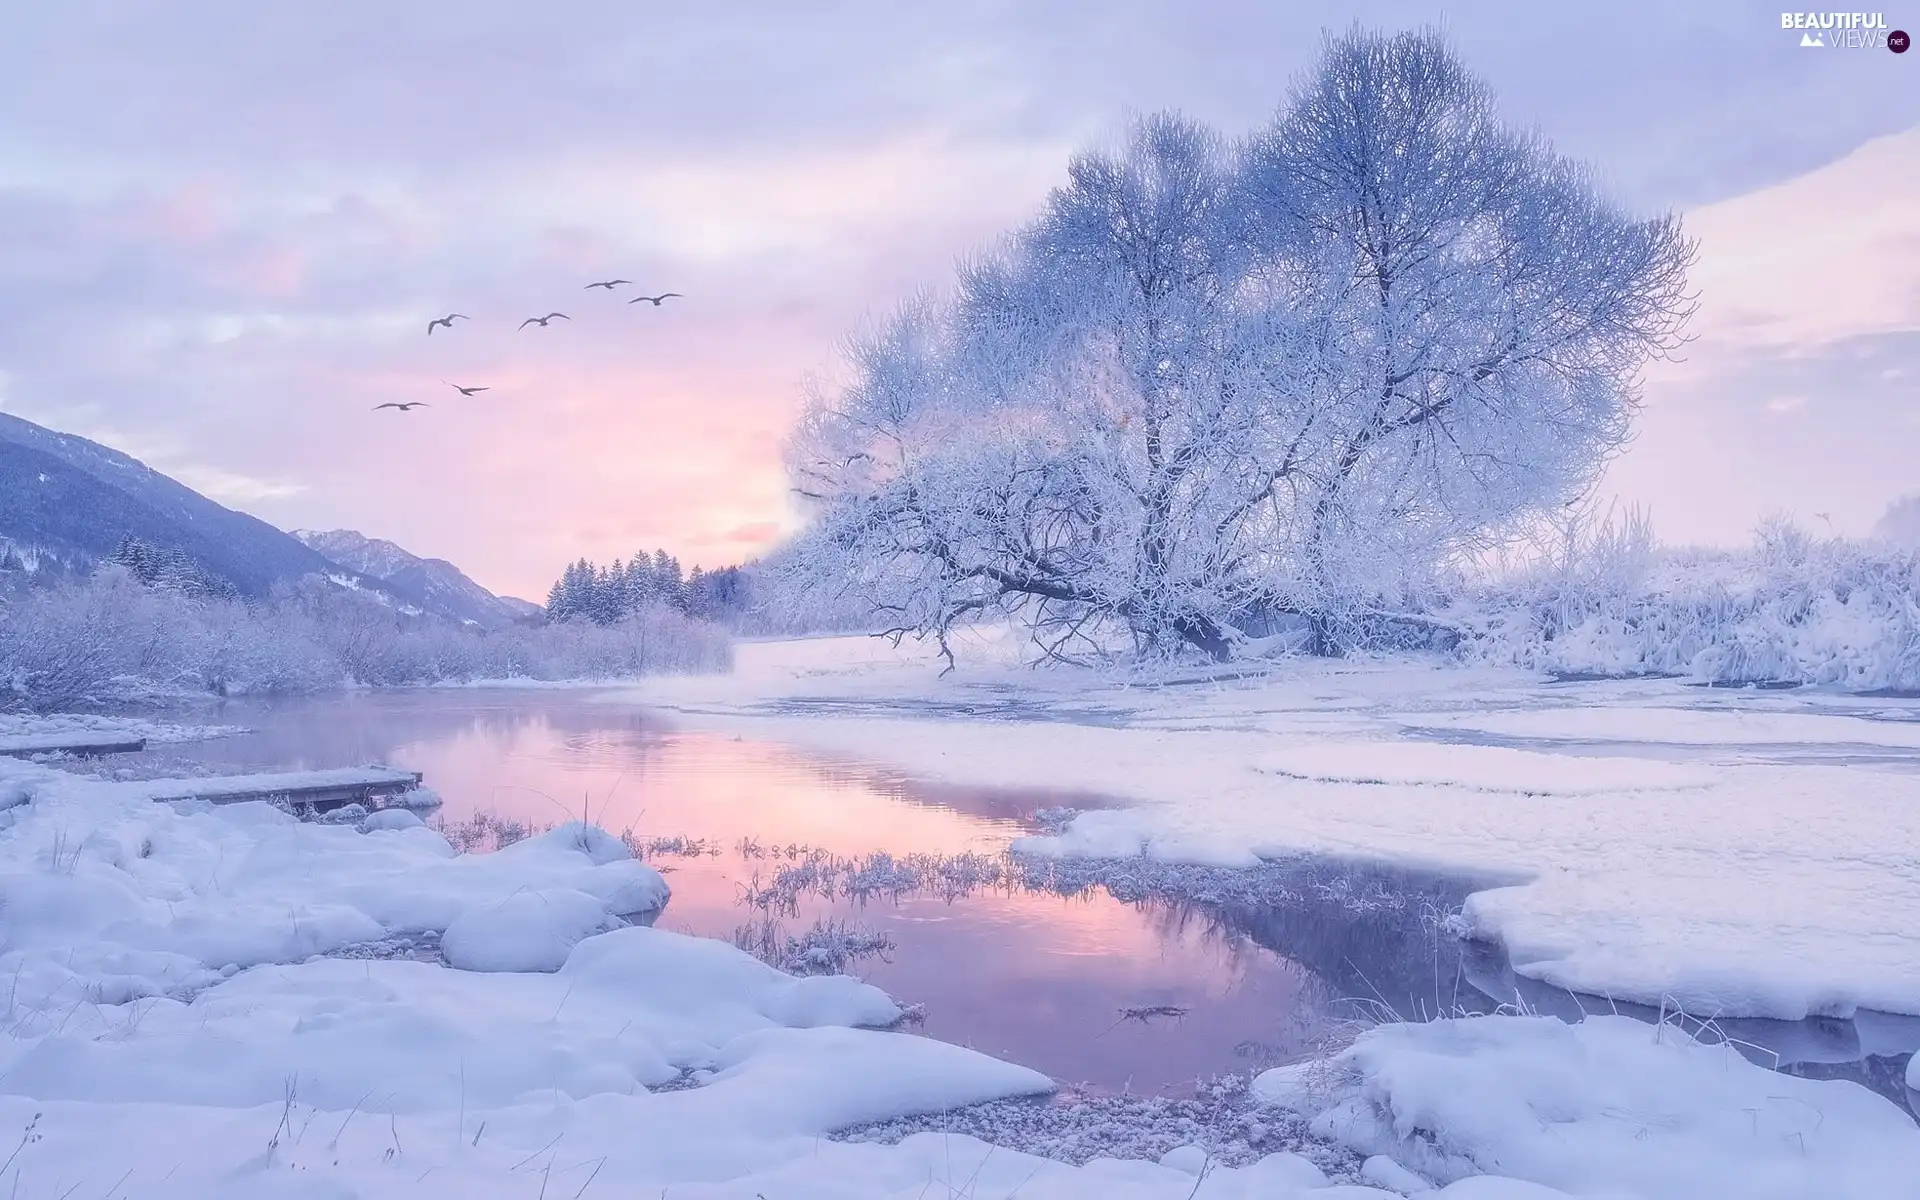 River, Mountains, birds, frosty, viewes, Sunrise, winter, trees